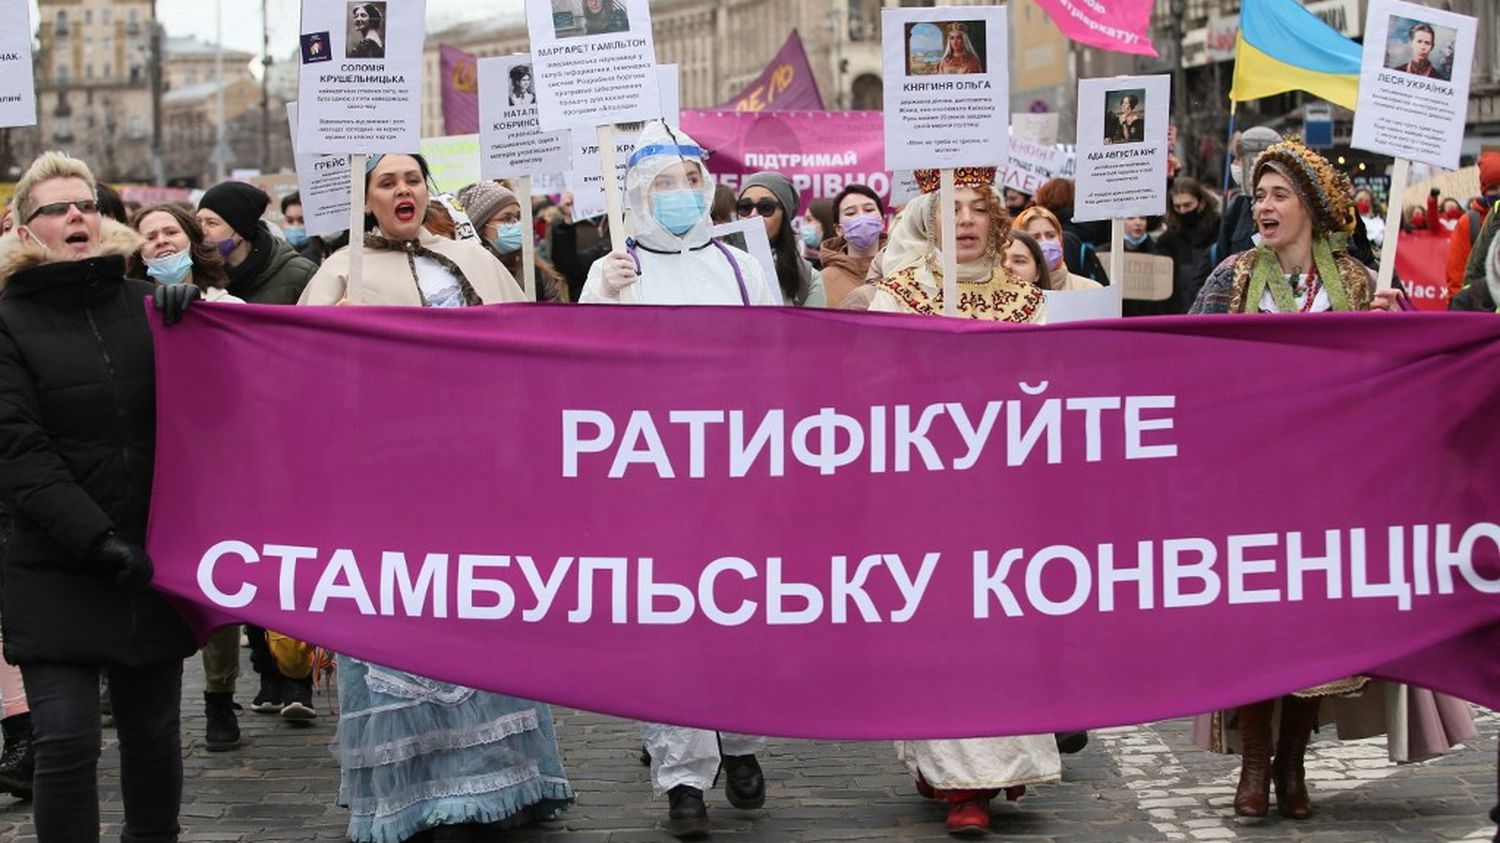 In the midst of war, the Ukrainian Parliament ratifies the Istanbul Convention against violence against women
